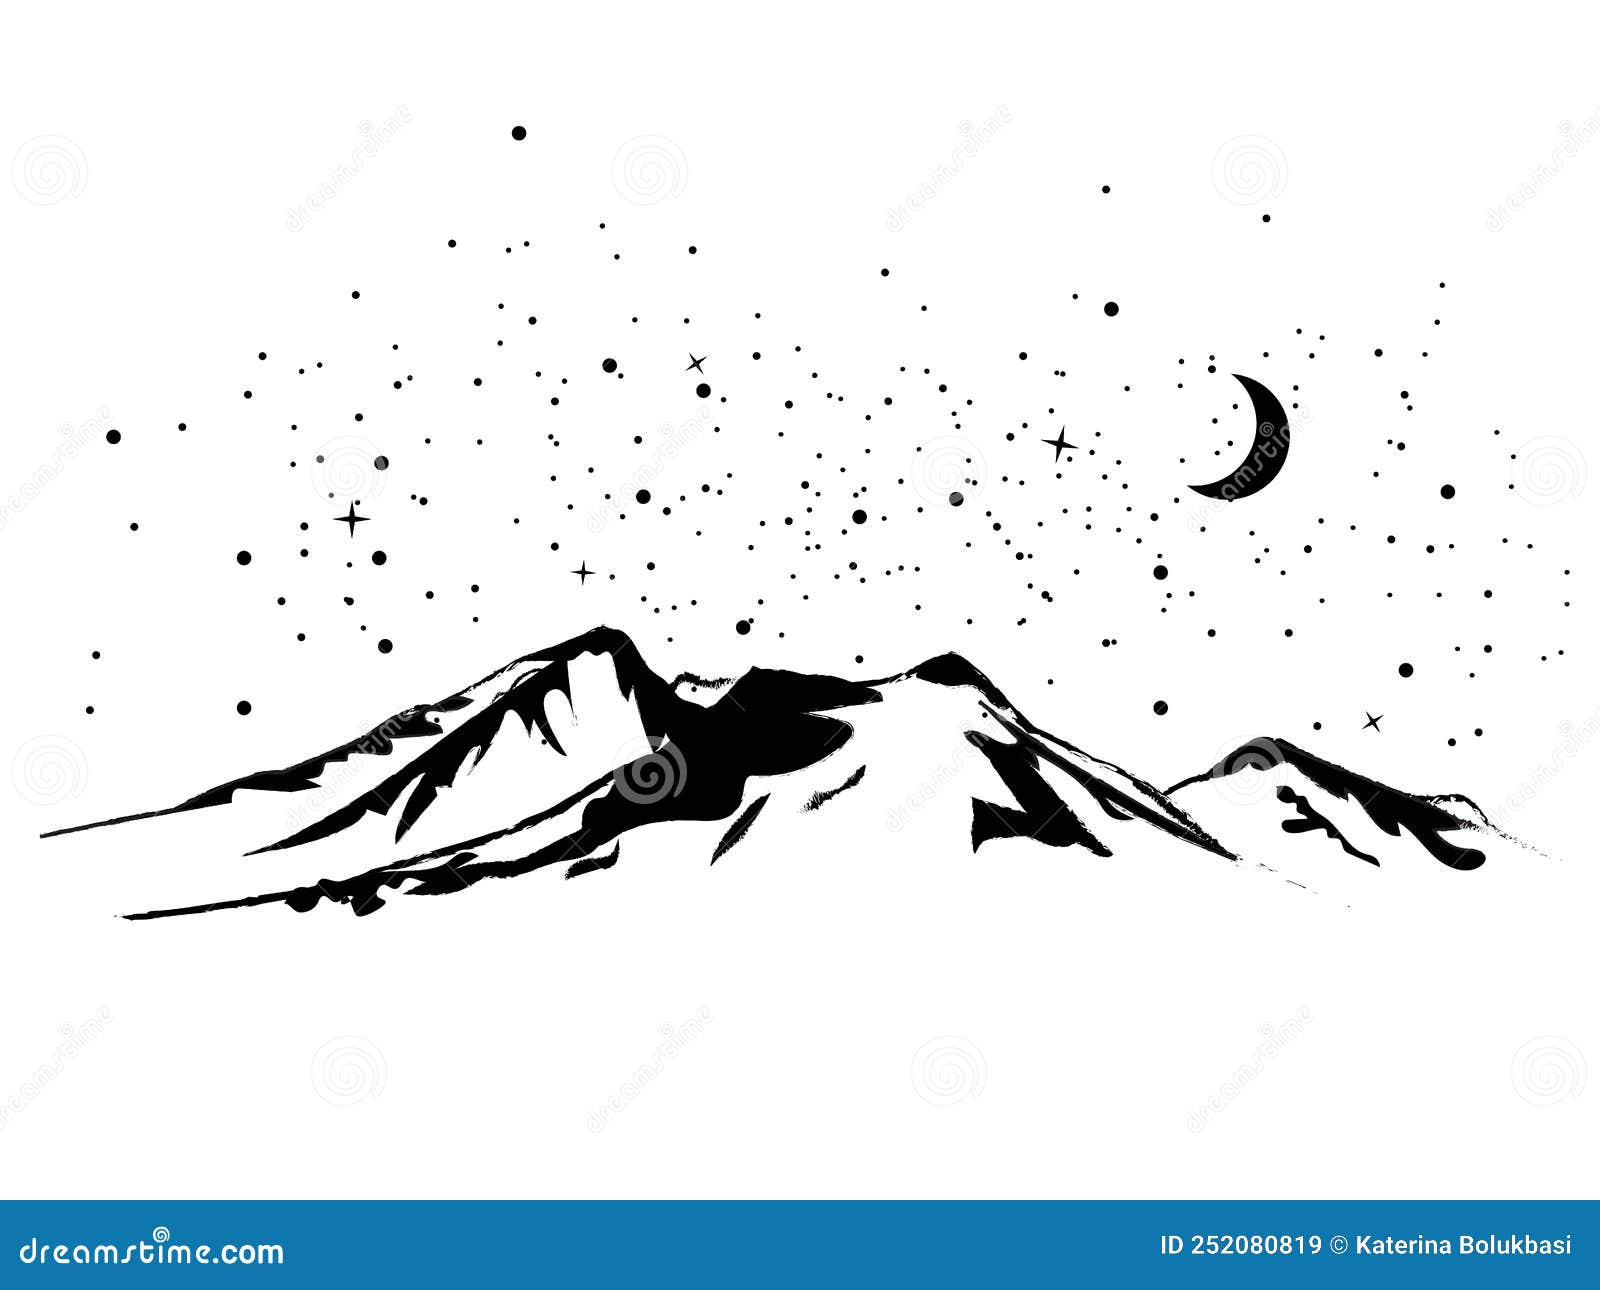 Free: mountain silhouette icon rocky peaks - nohat.cc